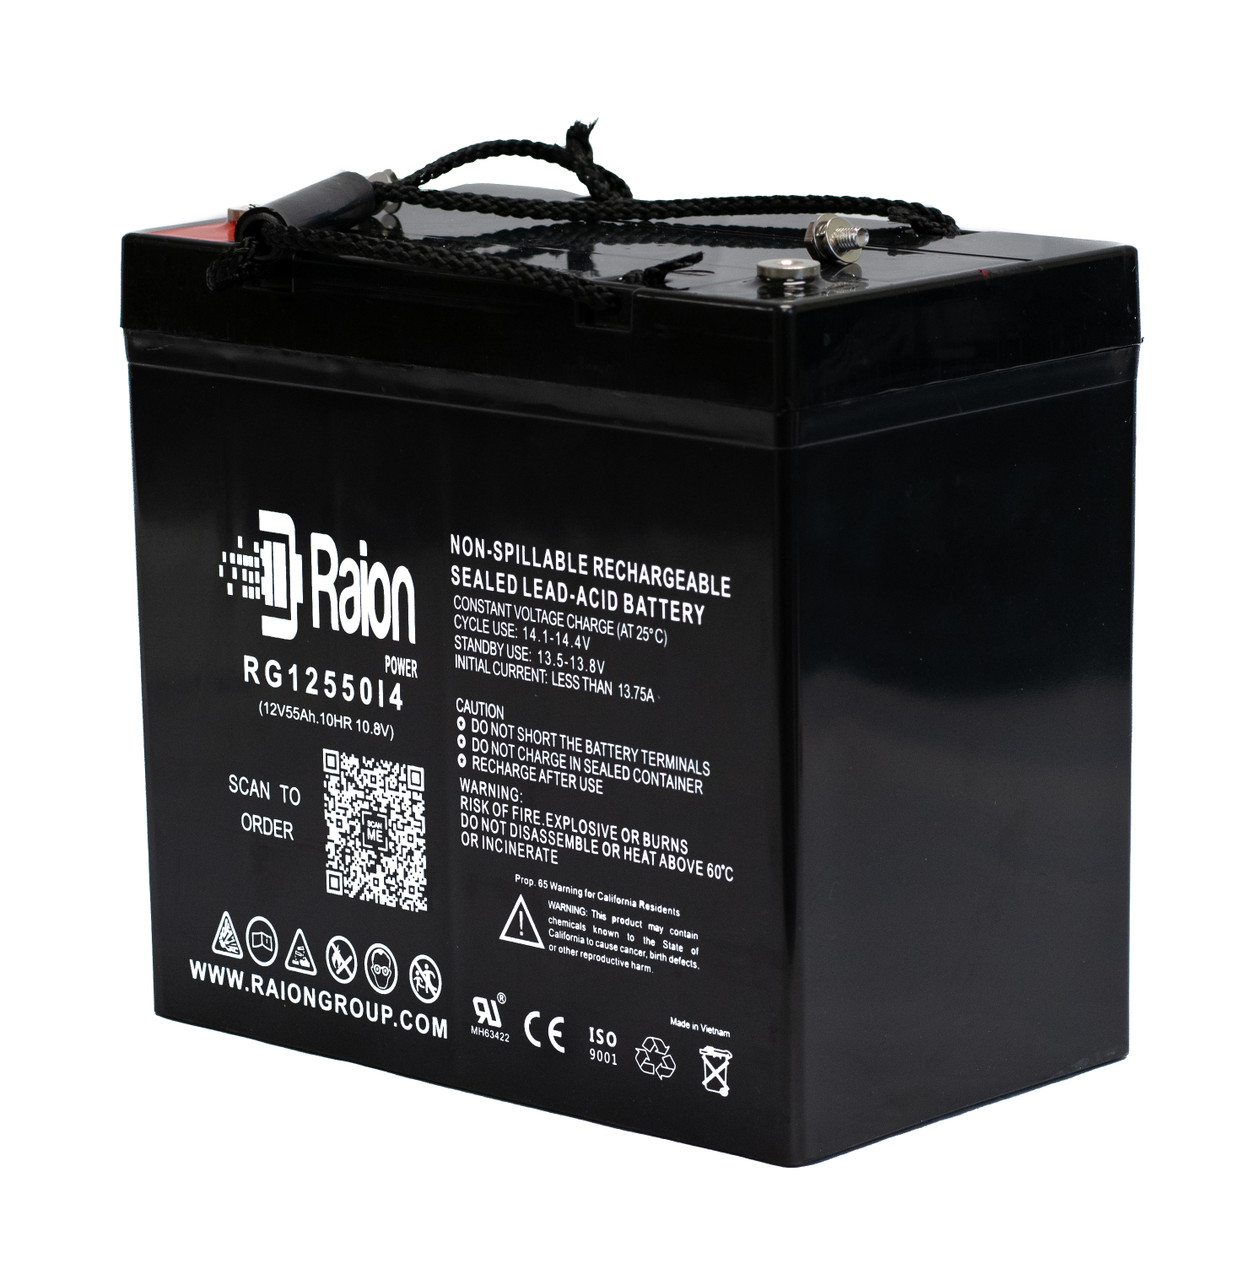 Raion Power 12V 55Ah 22NF Mobility Scooter Battery Replacement for Merits Health Products P314-2HD C